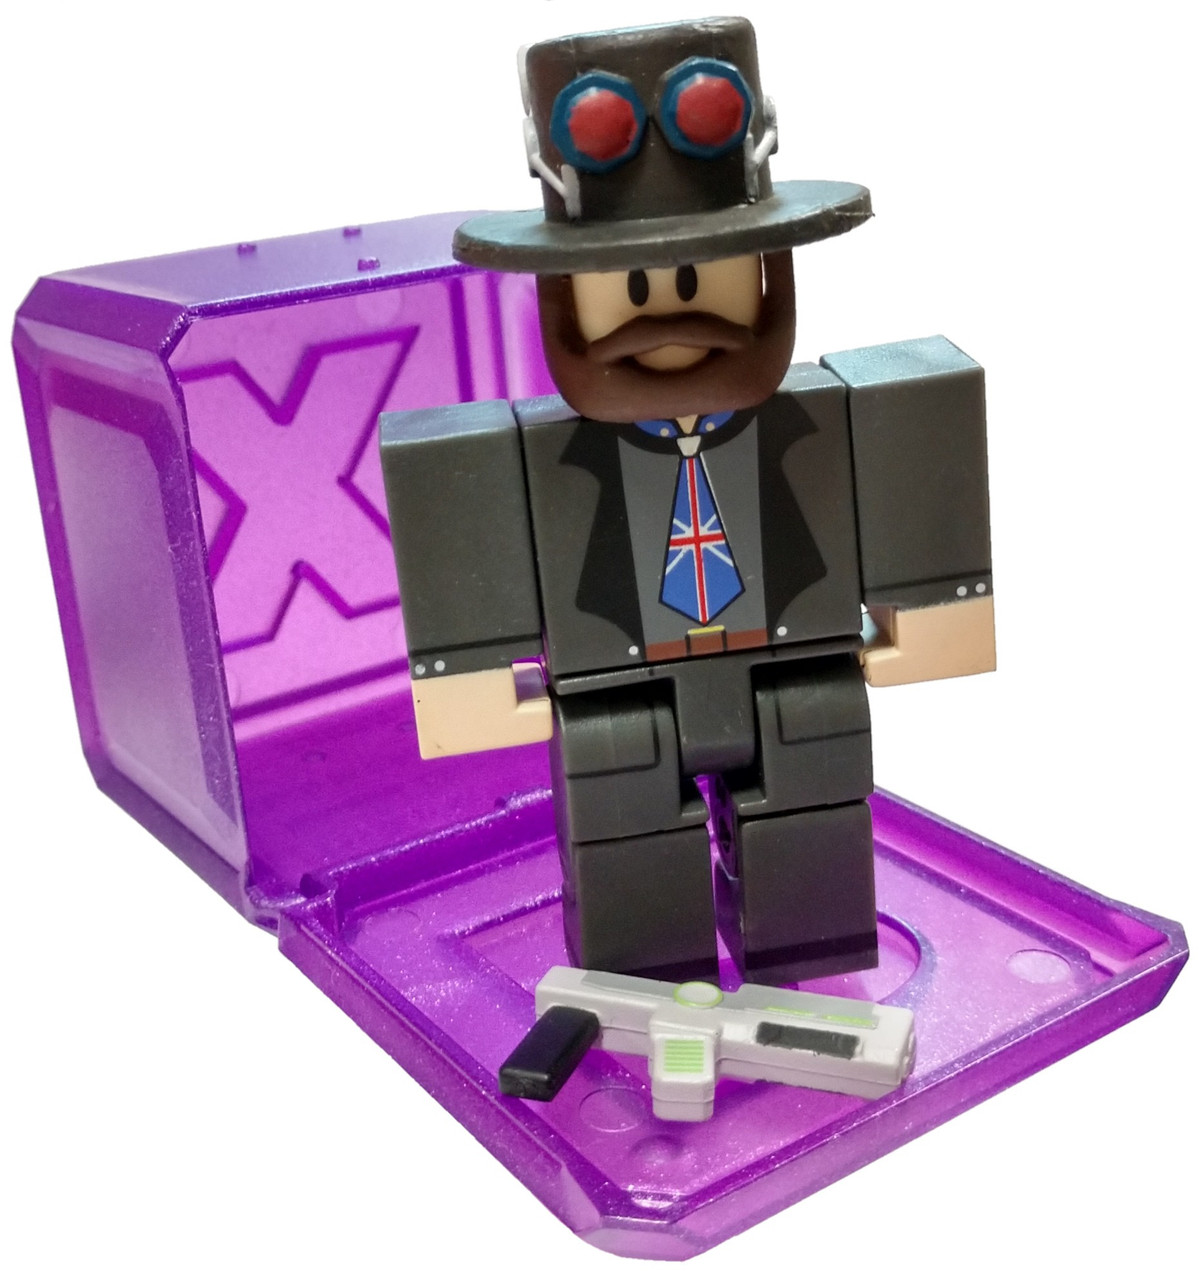 Roblox Celebrity Collection Series 3 Rolijok 3 Mini Figure With Cube And Online Code Loose Jazwares Toywiz - firebrand1 roblox toy figurine toys games others on